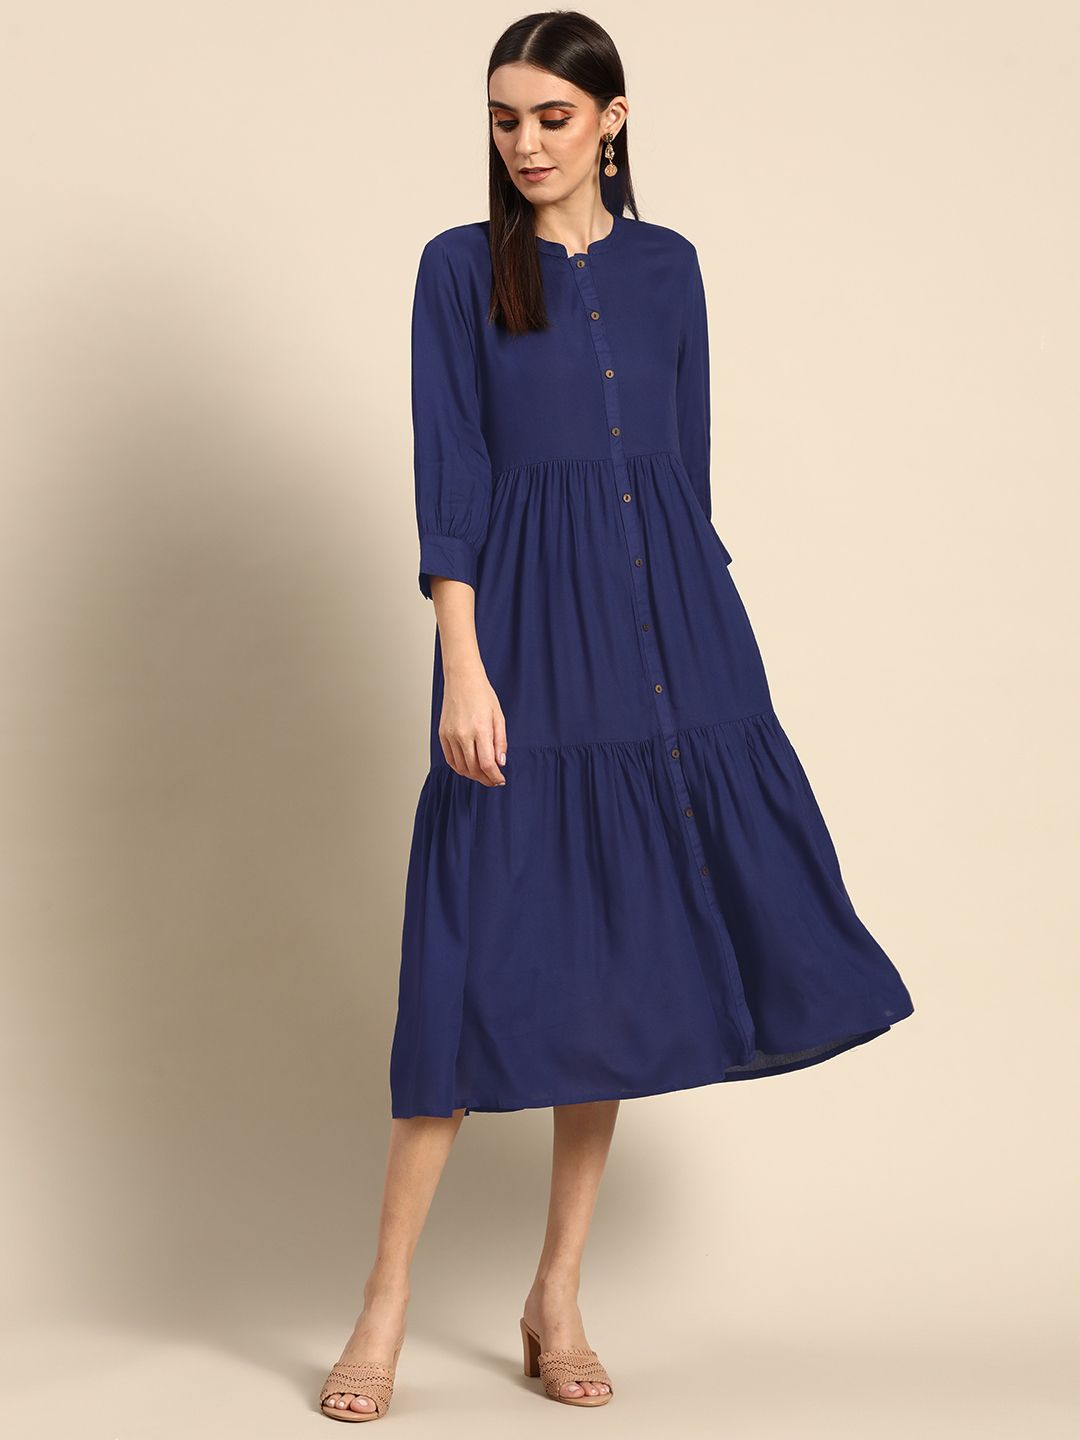 Anouk Navy Blue A-Line Maxi Dress Price in India